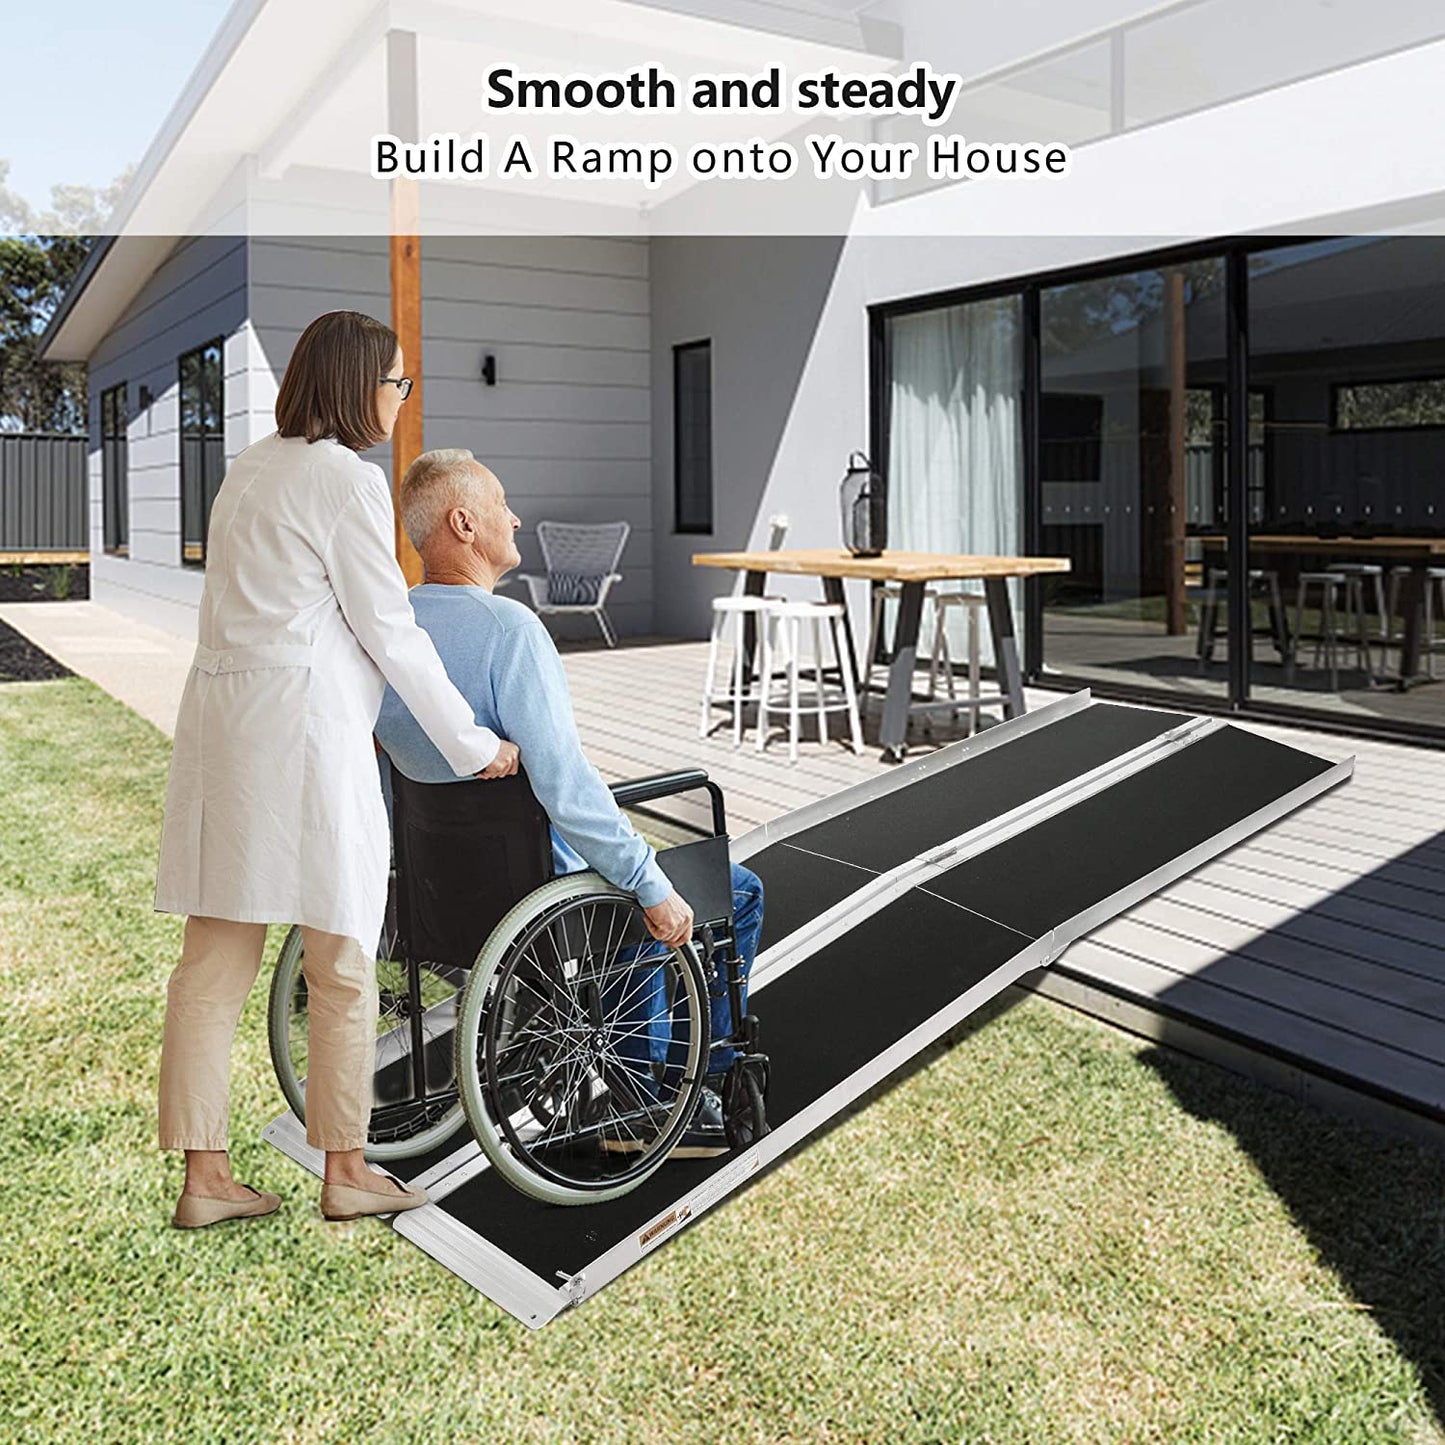 Portable Wheelchair Ramp 6Ft, Add to Your Independence, 600 LBS Capacity, Folding Aluminum Alloy Ramp, Portable Handles & Anti-Slip Carpet, for Doorways, Stairs, Mobility Scooter, Porch